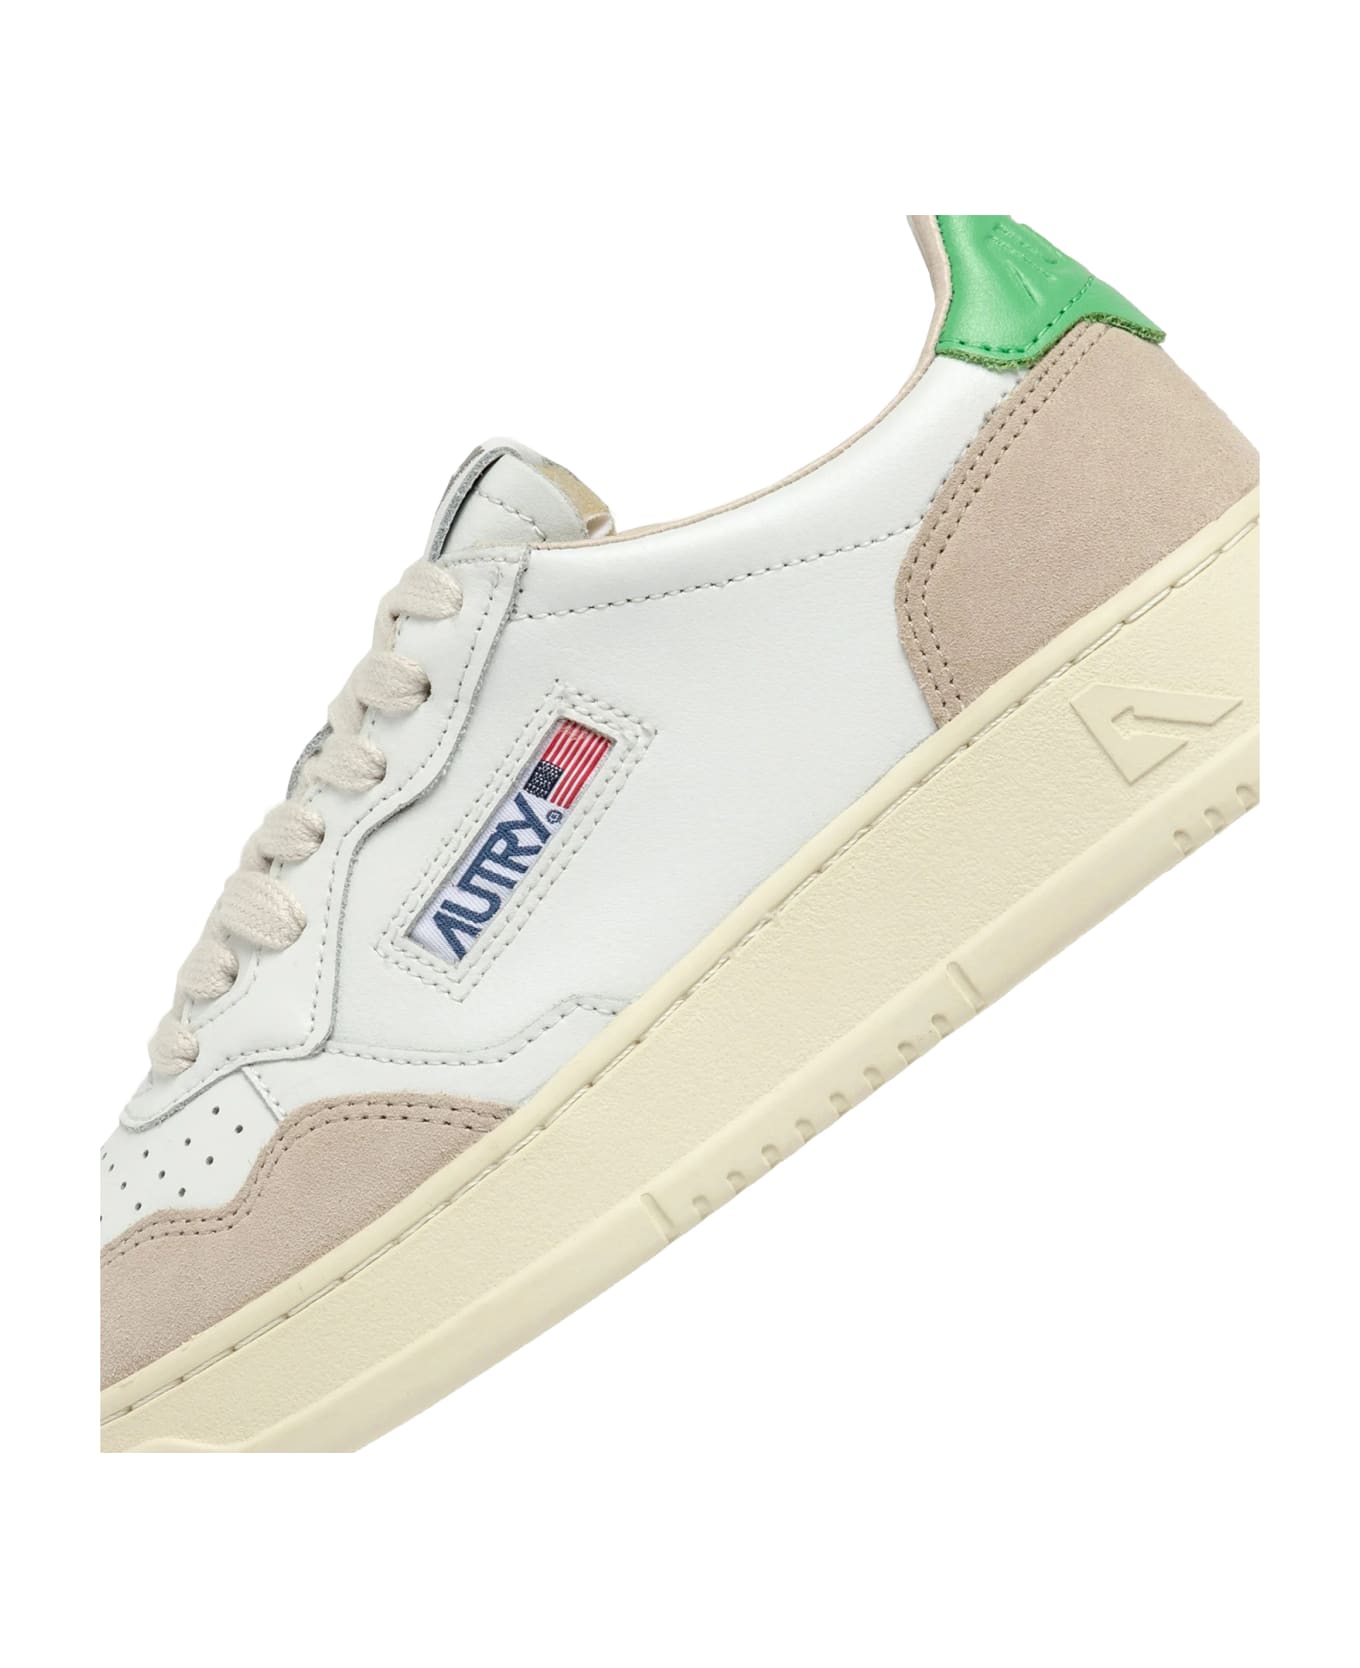 Autry Sneakers Medalist Low - Green